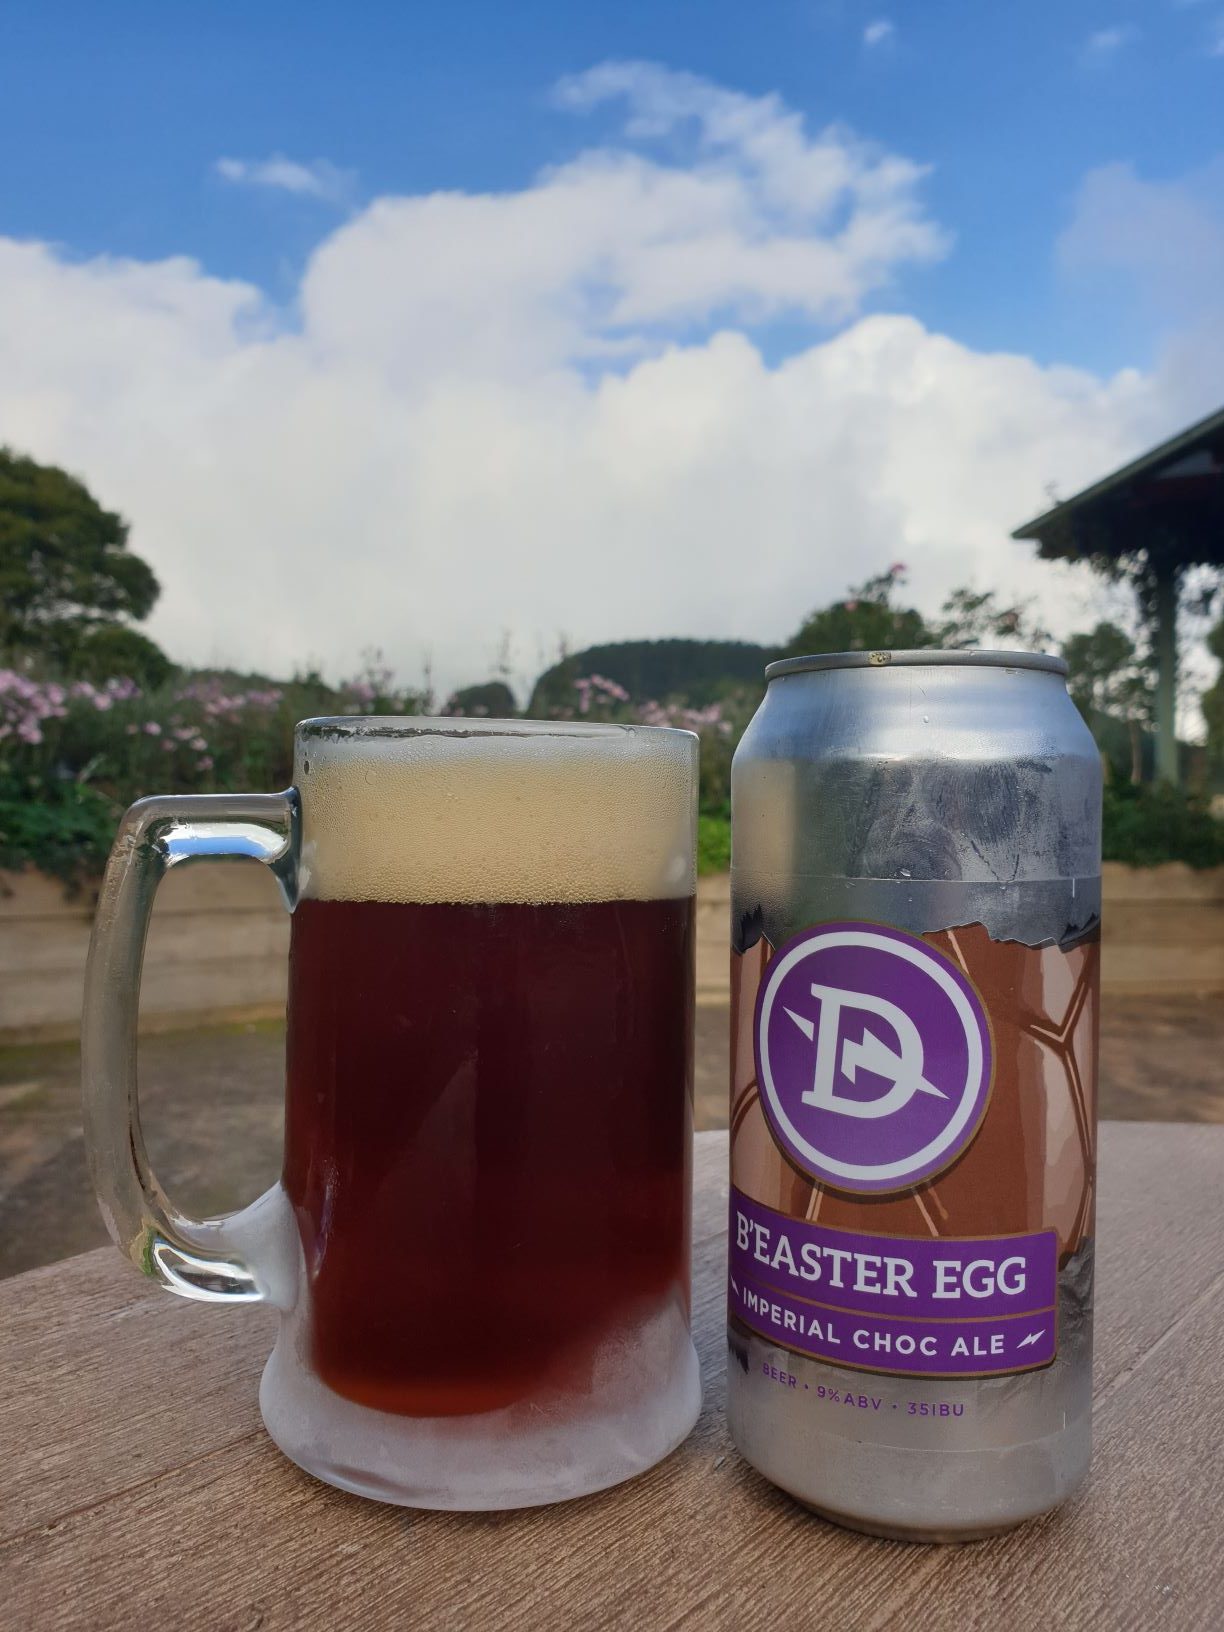 B’easter Egg Imperial Choc Ale by Dainton Brewery